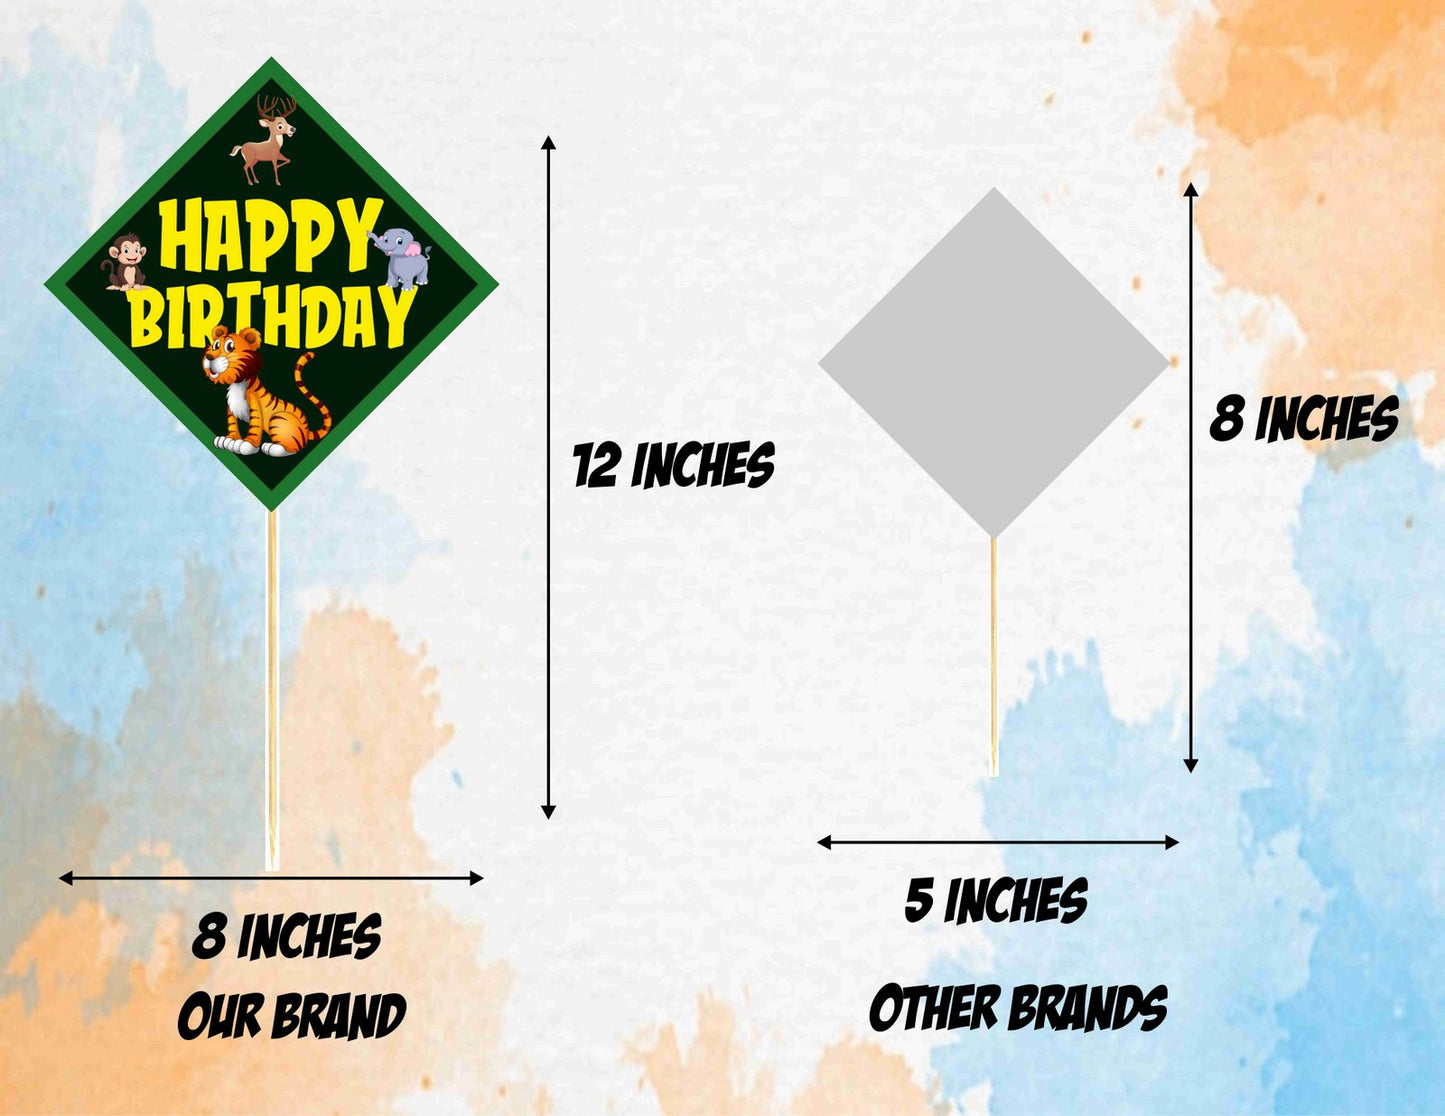 Jungle Theme Birthday Photo Booth Party Props Theme Birthday Party Decoration, Birthday Photo Booth Party Item for Adults and Kids